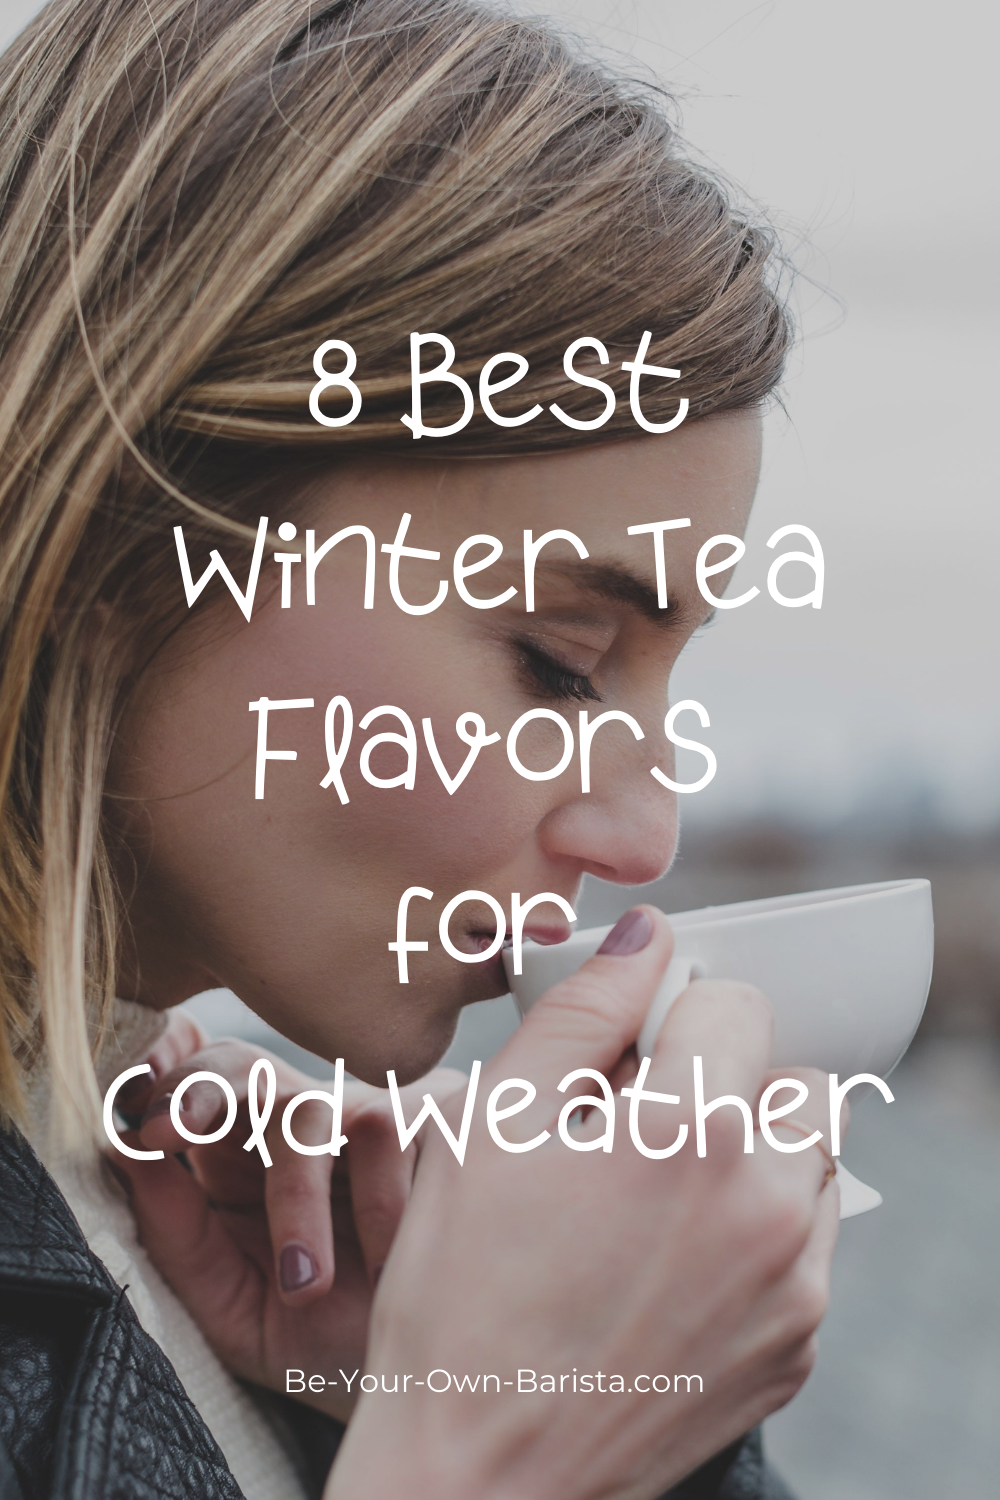 8 Best Winter Tea Flavors for Cold Weather